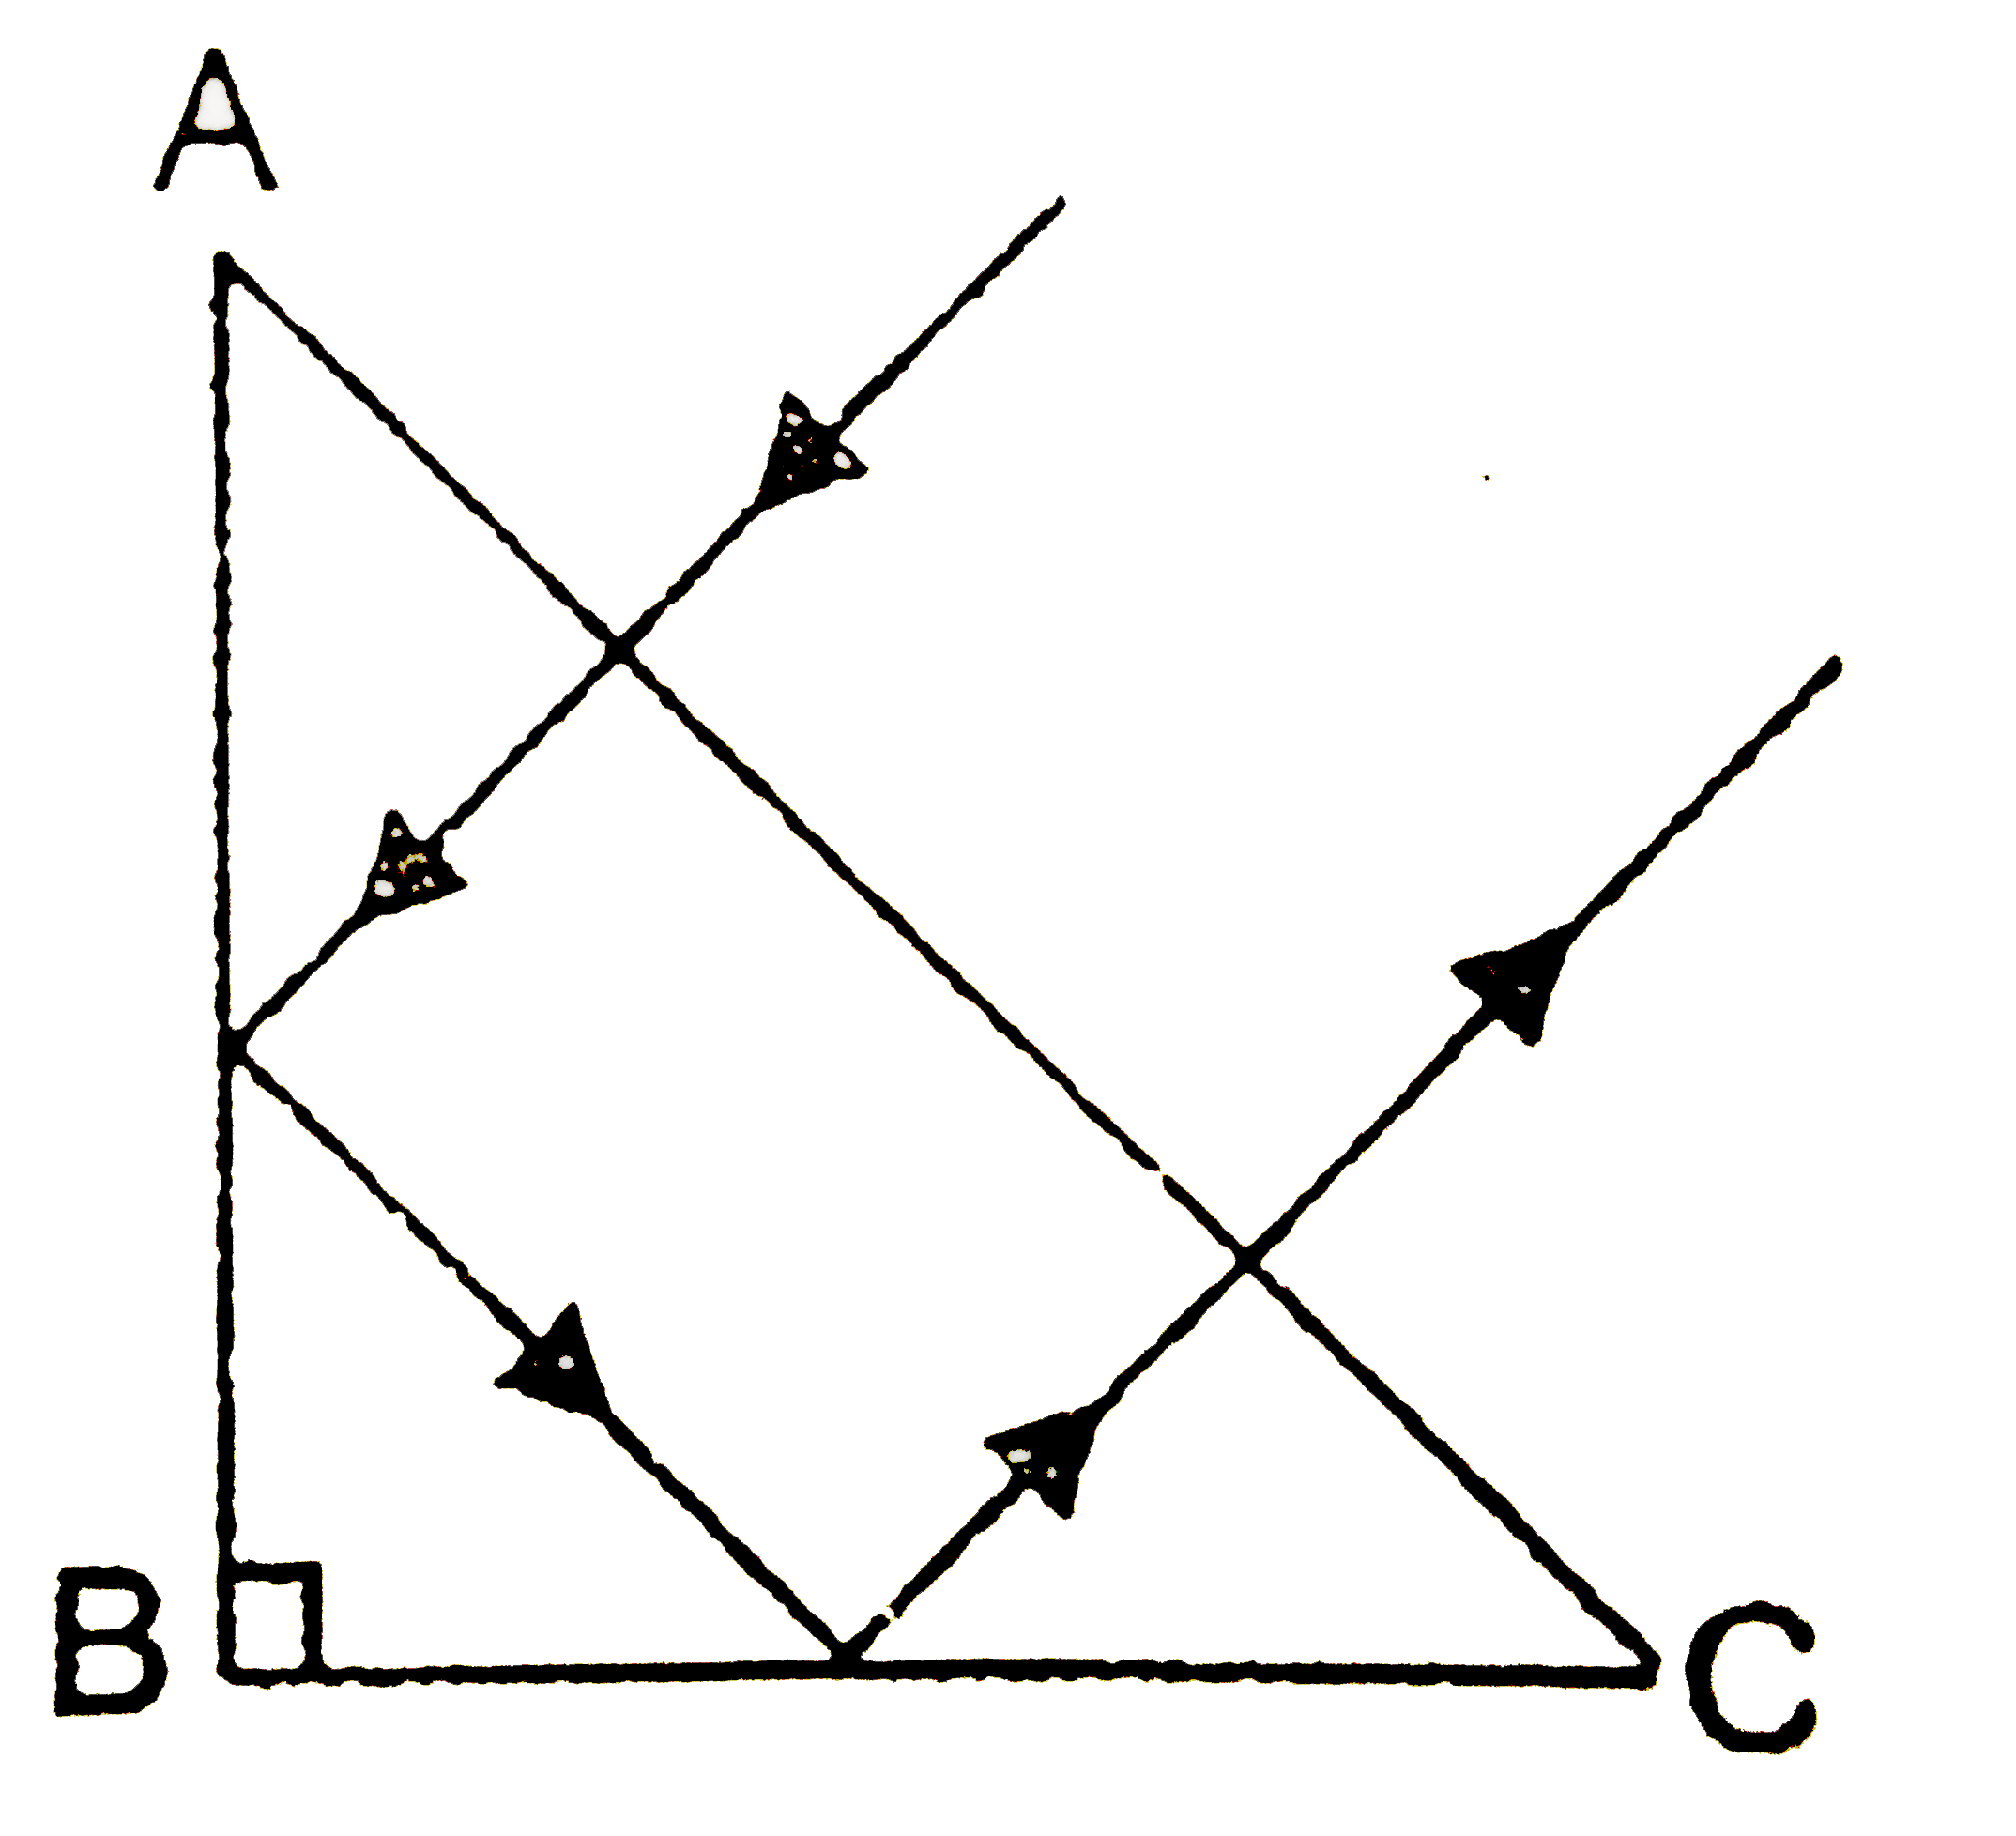 At what  values fo the refractive  index  of a recantangular prism can  a ray travel as shwon in figure. The section of the prism is an isoseless triangle  and the ray  in normally  incident  onto the face AC.